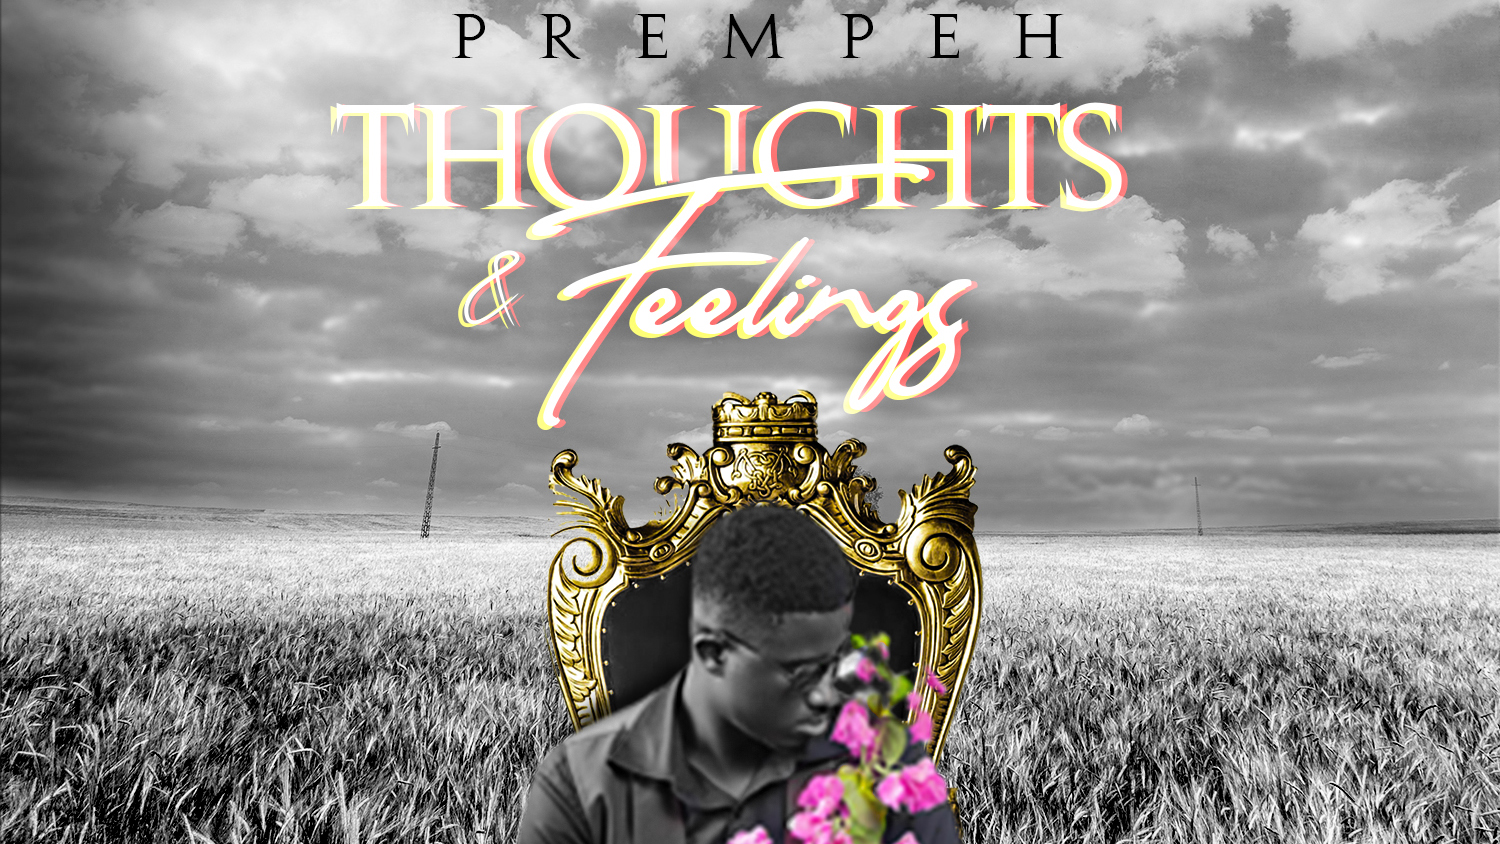 Prempeh set to release maiden EP; Thoughts & Feelings